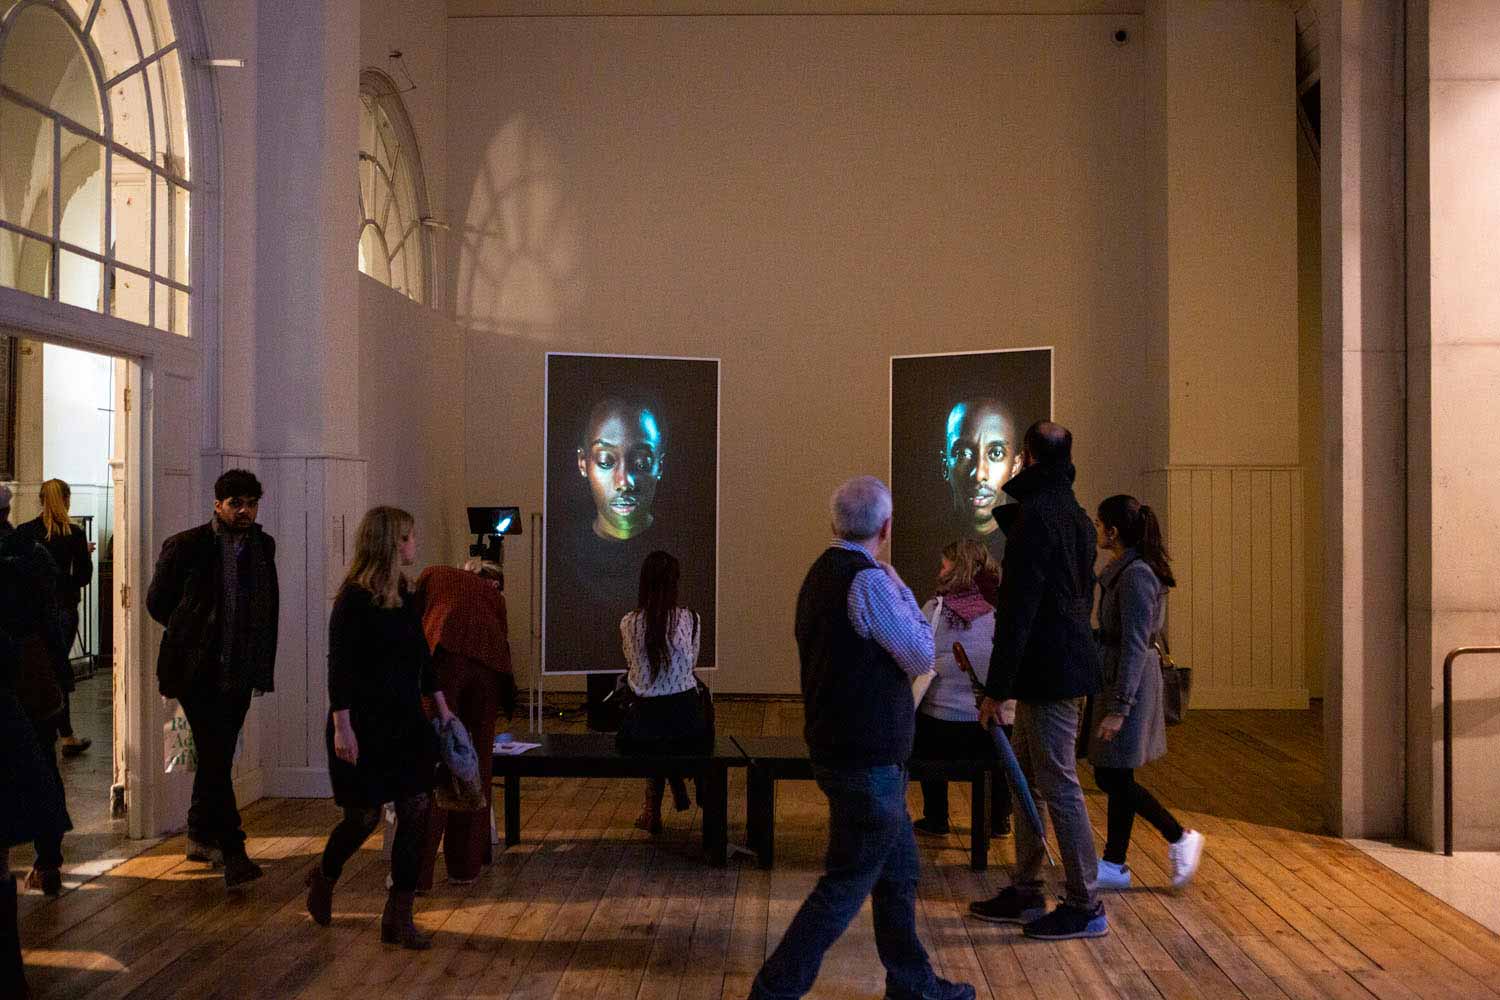 Installation image of Mirror IV by David Cotterrell. Two people are shown on screens in front of a group of people in a gallery.